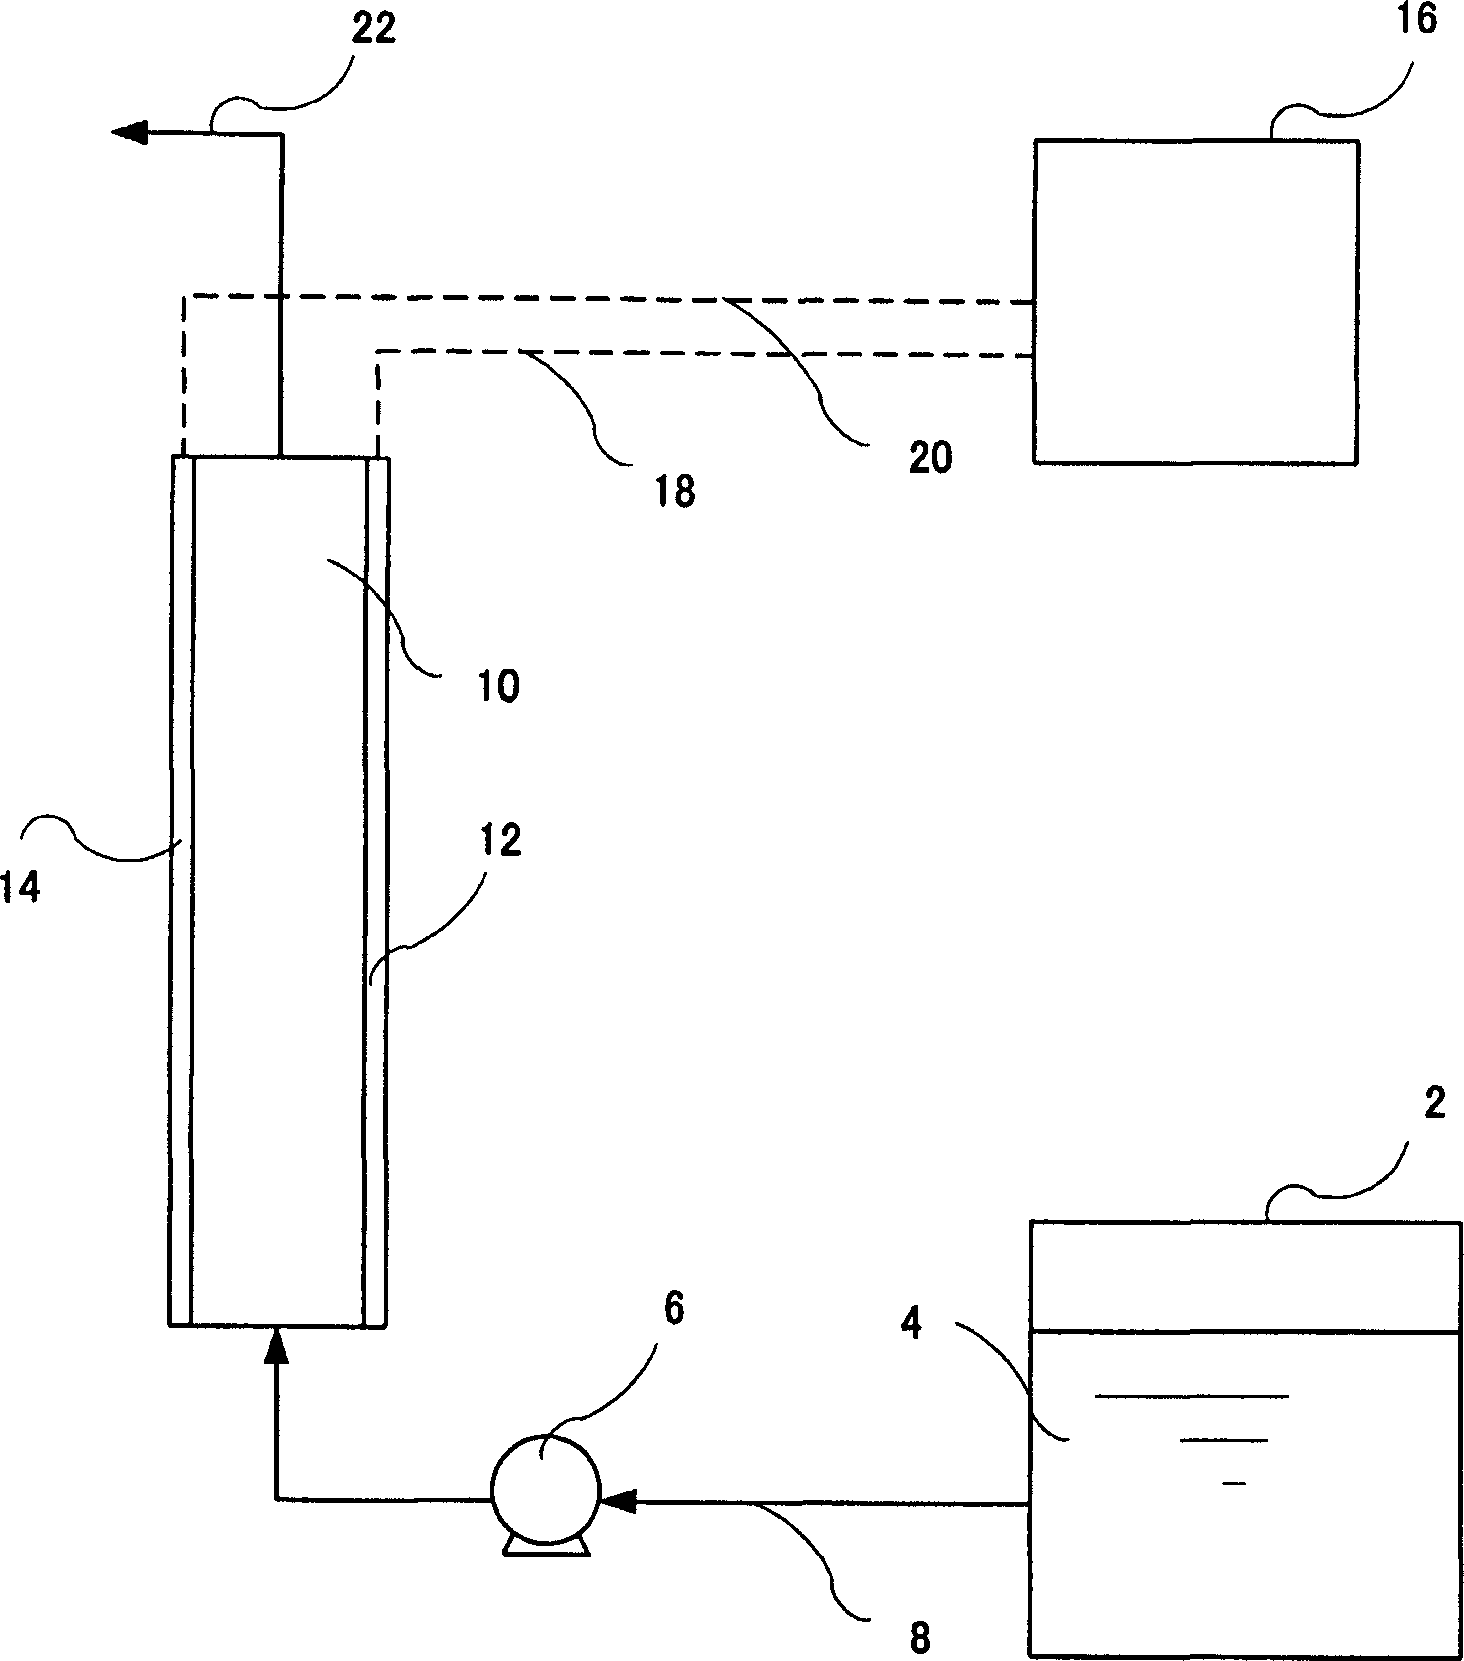 Method for producing mixed electrolyzed water